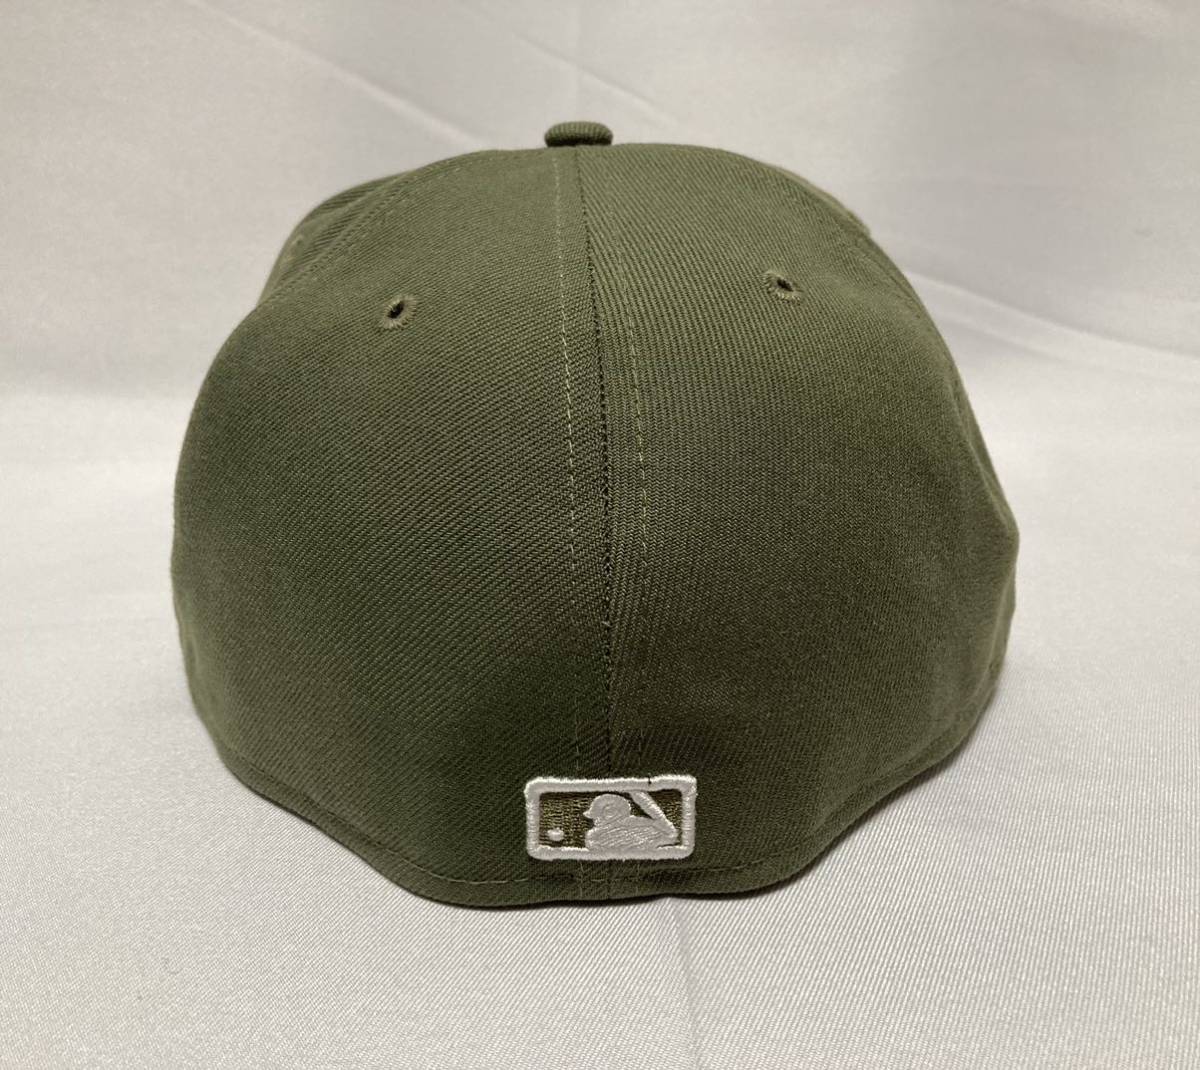 NEW ERA LOS ANGELES DODGERS OLIVE AUTHENTIC COLLECTION 59FIFTY ニューエラ キャップ 5950 ロサンゼルス ドジャース オリーブ 7 1/2_画像2